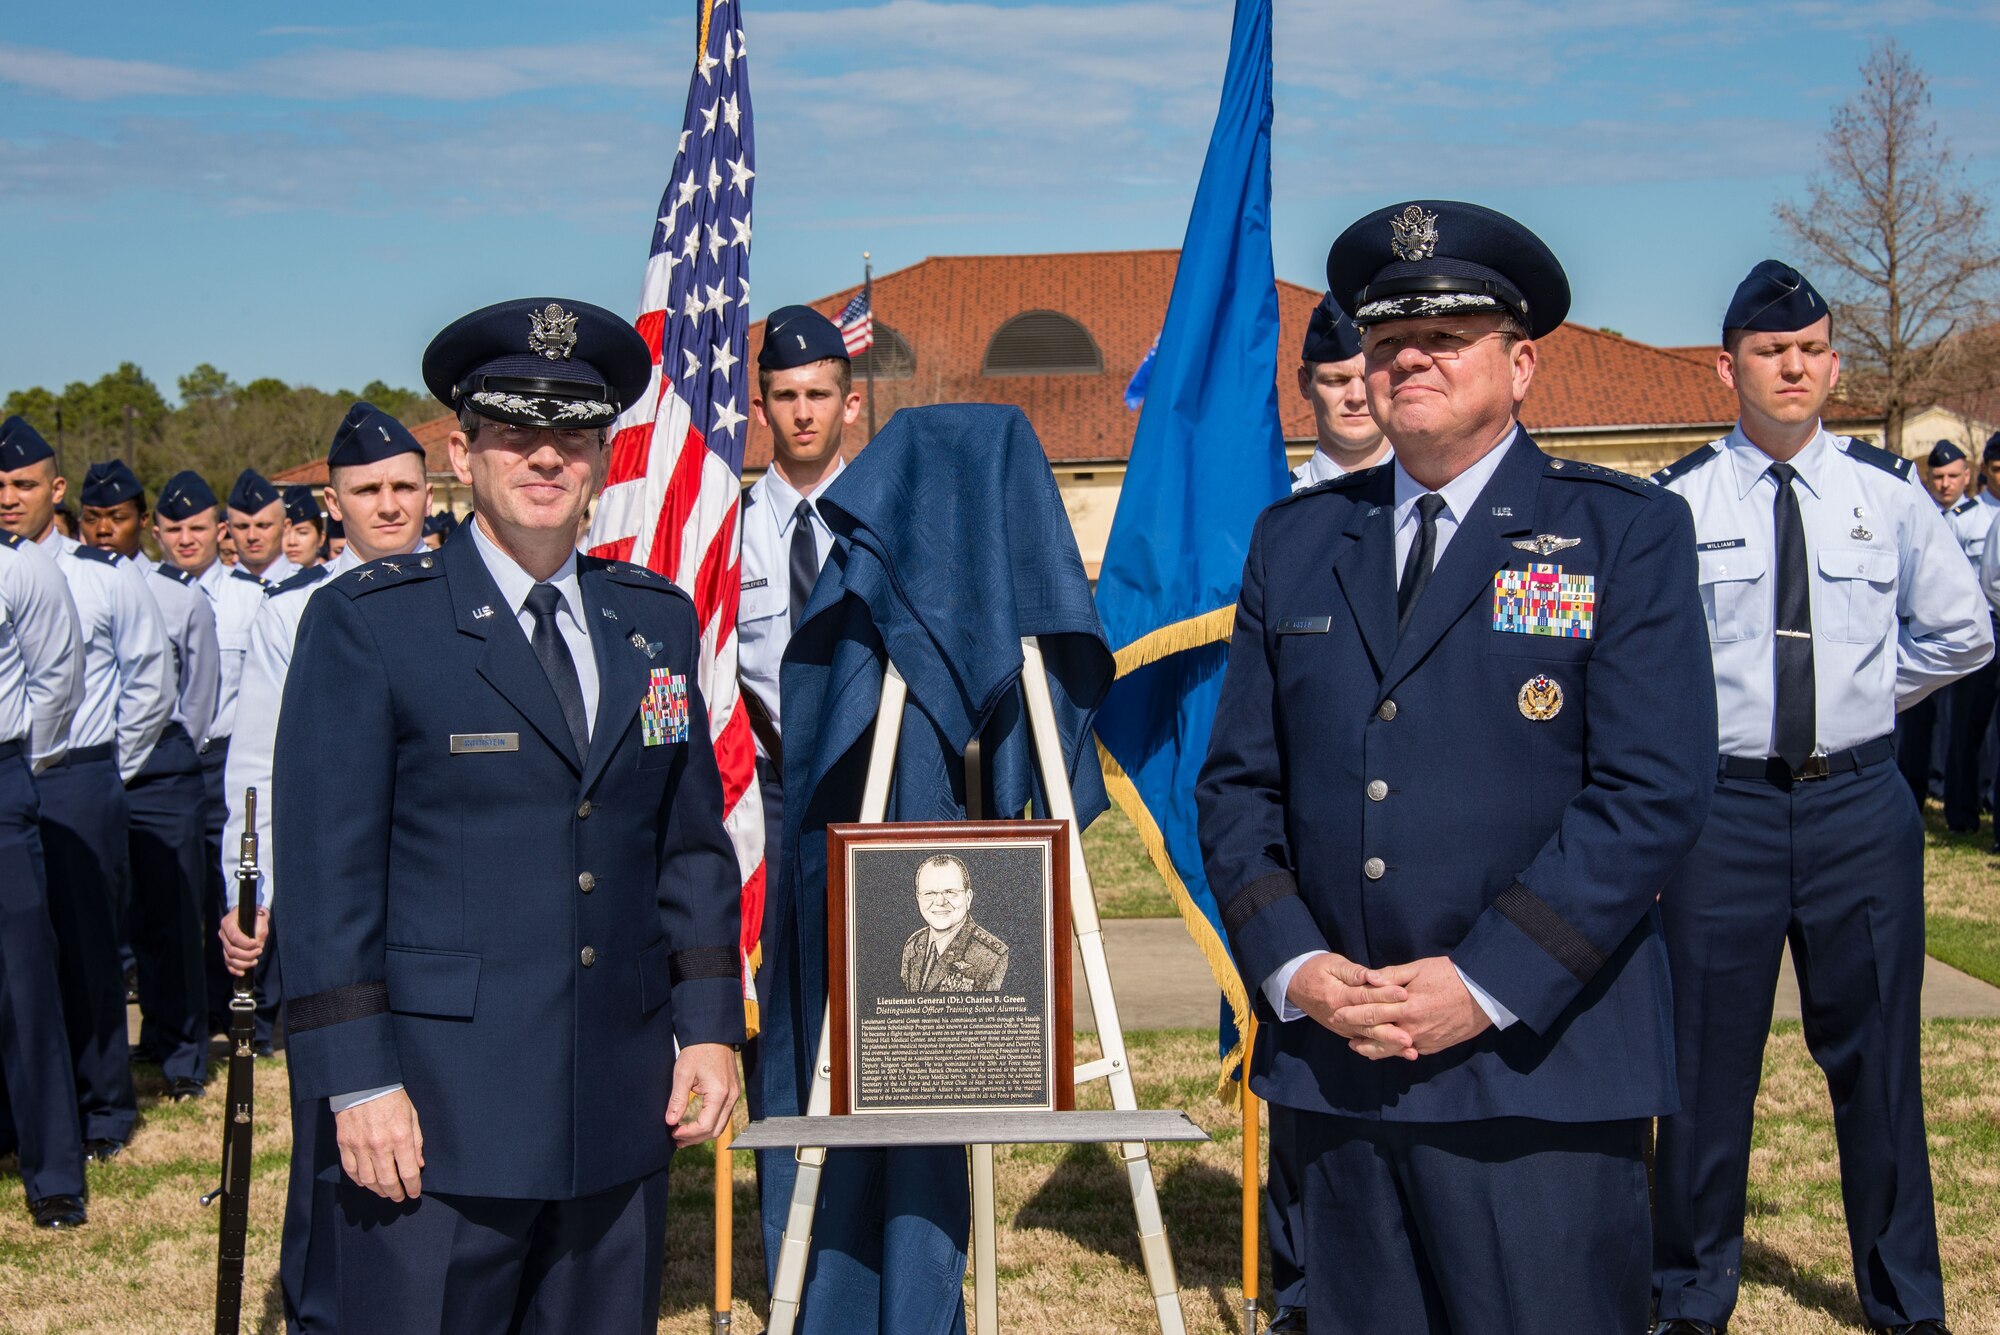 AU, OTS honors former Air Force Surgeon General as a Distinguished Alumni